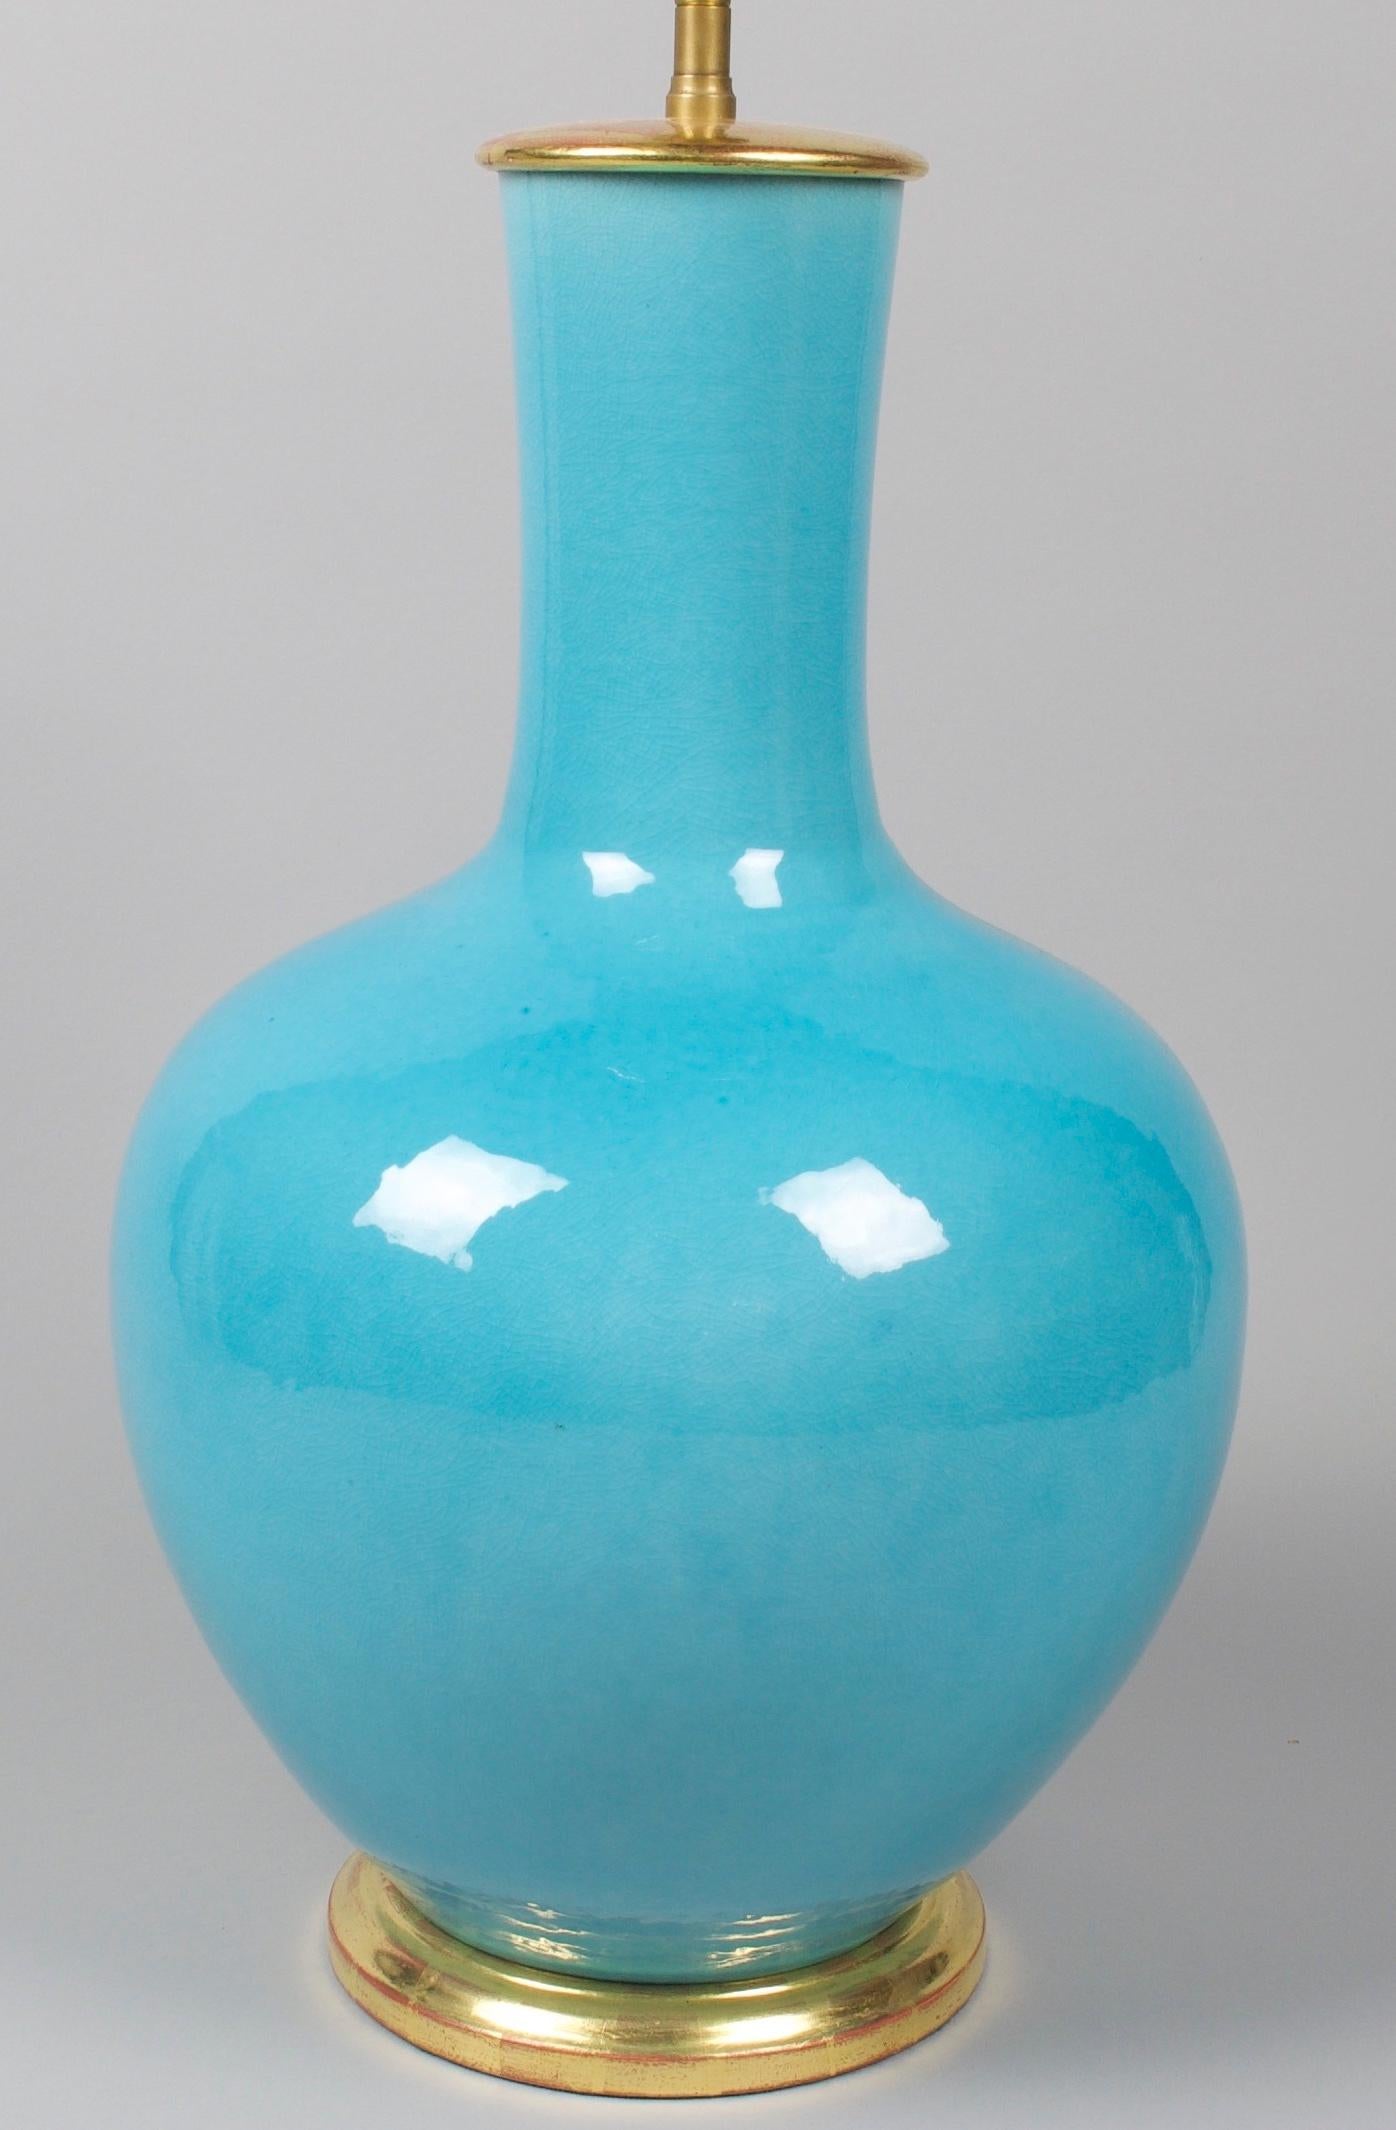 Superb turquoise blue straight necked porcelain vase, now mounted as a table lamp, with a hand-gilded turned base.

Height of vase: 17 1/2 in (44.5 cm) including the base, but excluding any electrical fitment and lampshade.

All of our lamps can